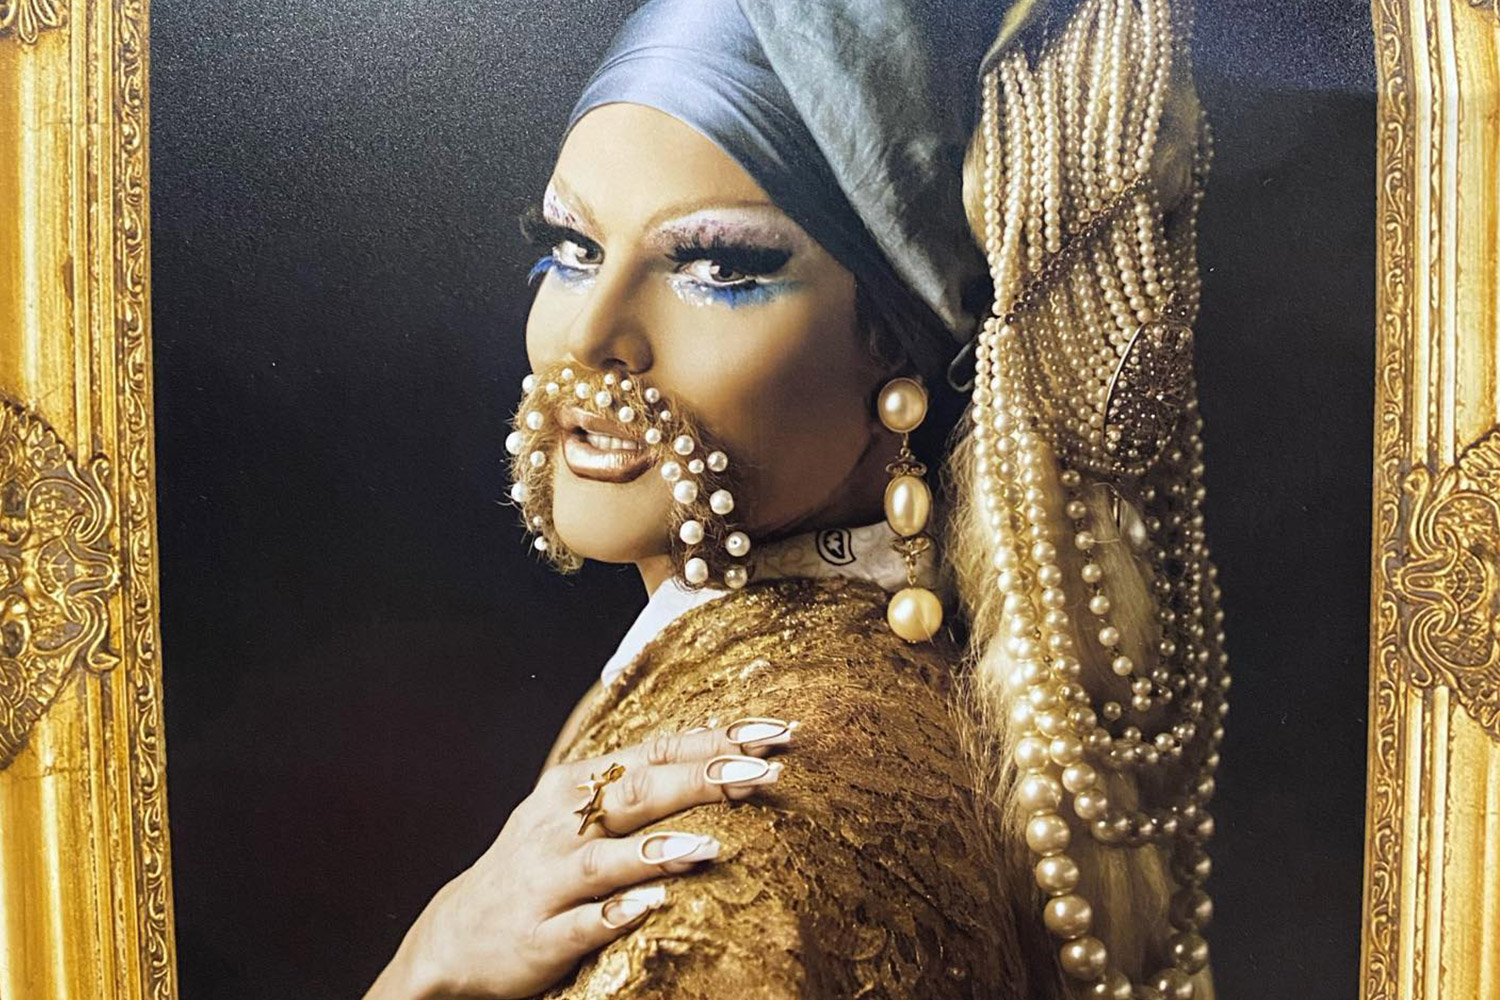 Drag queen dressed as Girl With A Pearl Earring painting